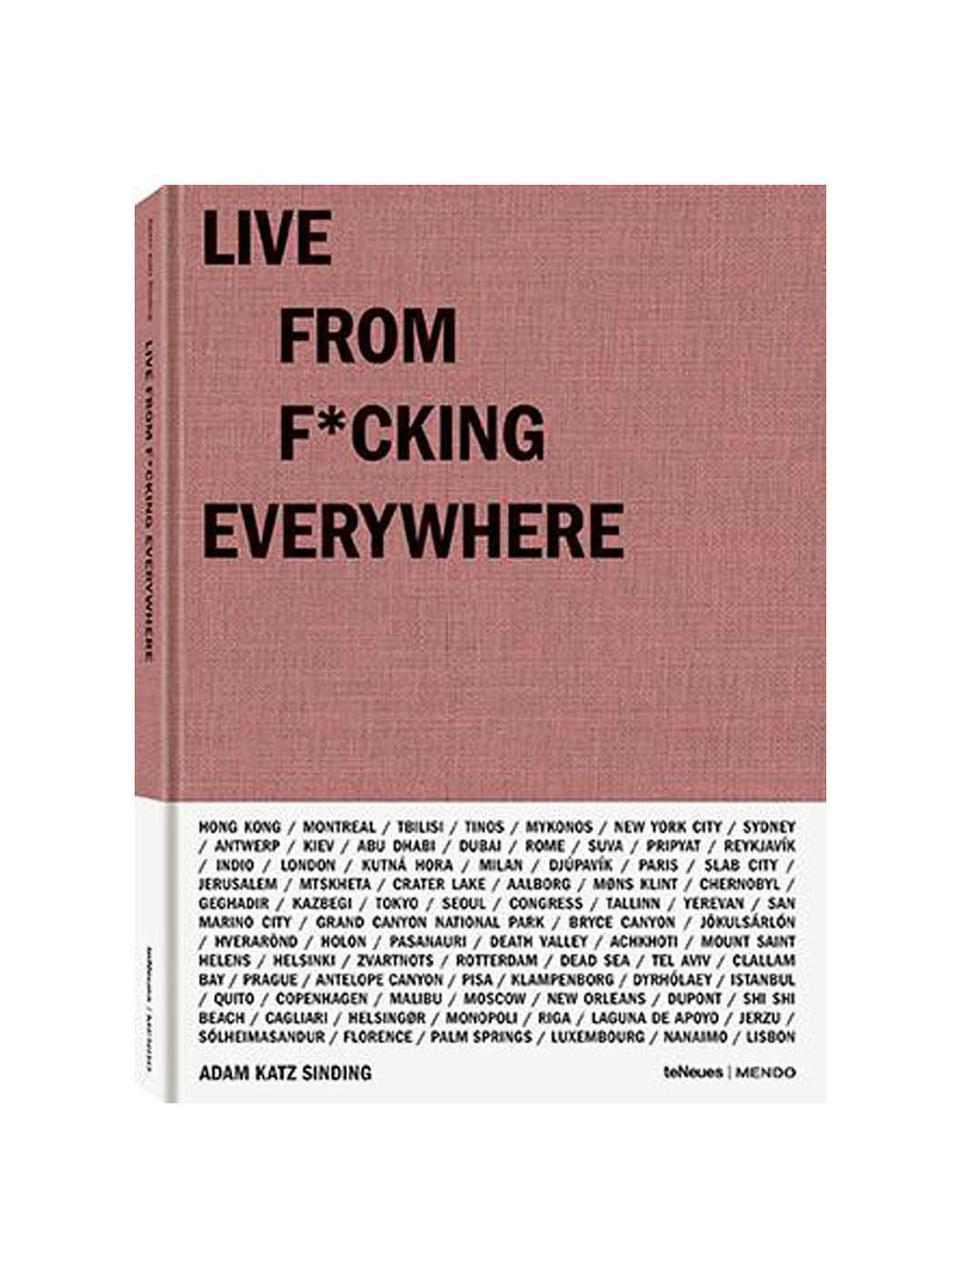 Album Live from F*cking Everywhere, Papier, Bildband Live from F*cking Everywhere, D 30 x S 22 cm